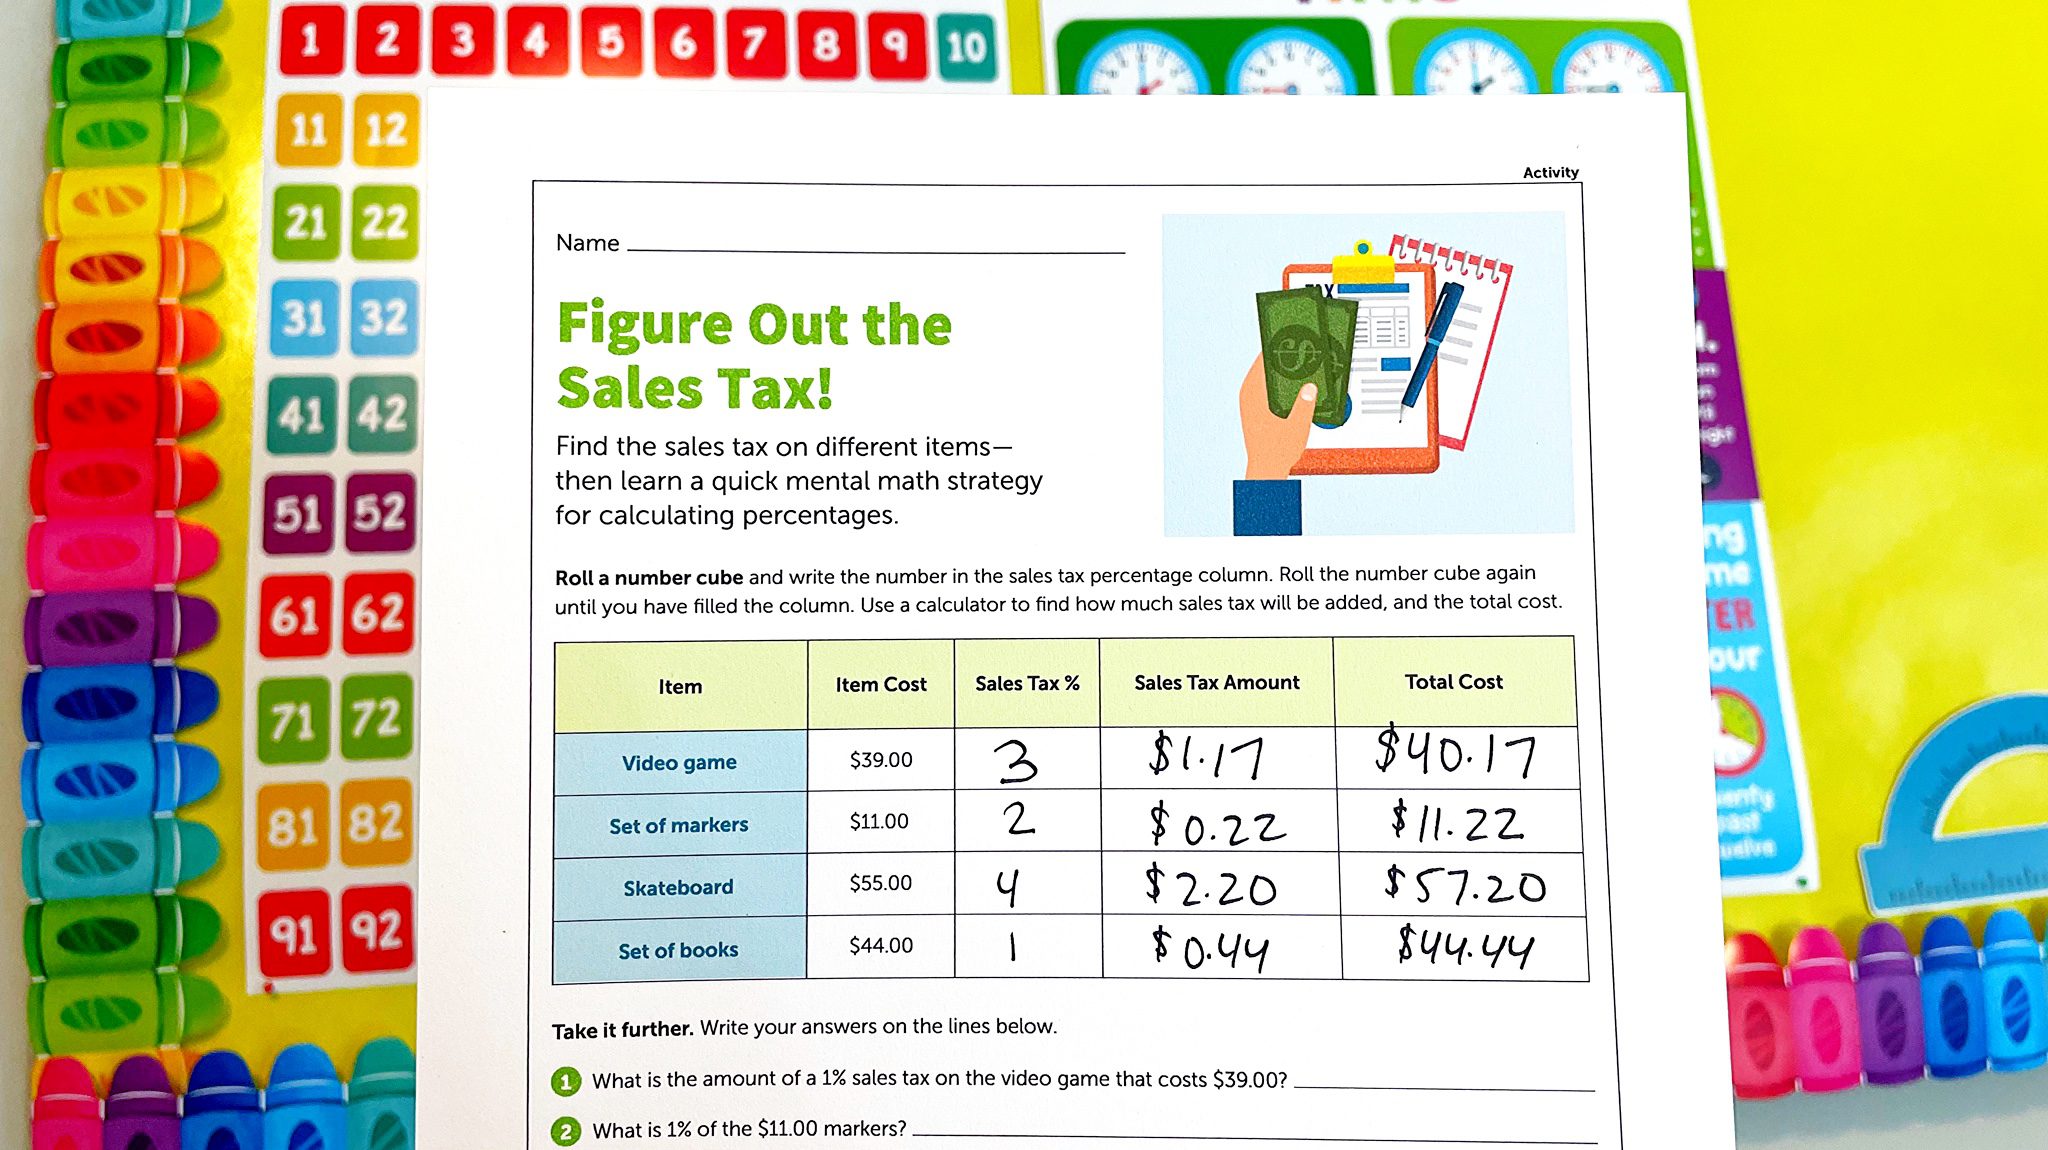 Flay lay of 'Calculating Sales Tax' lesson